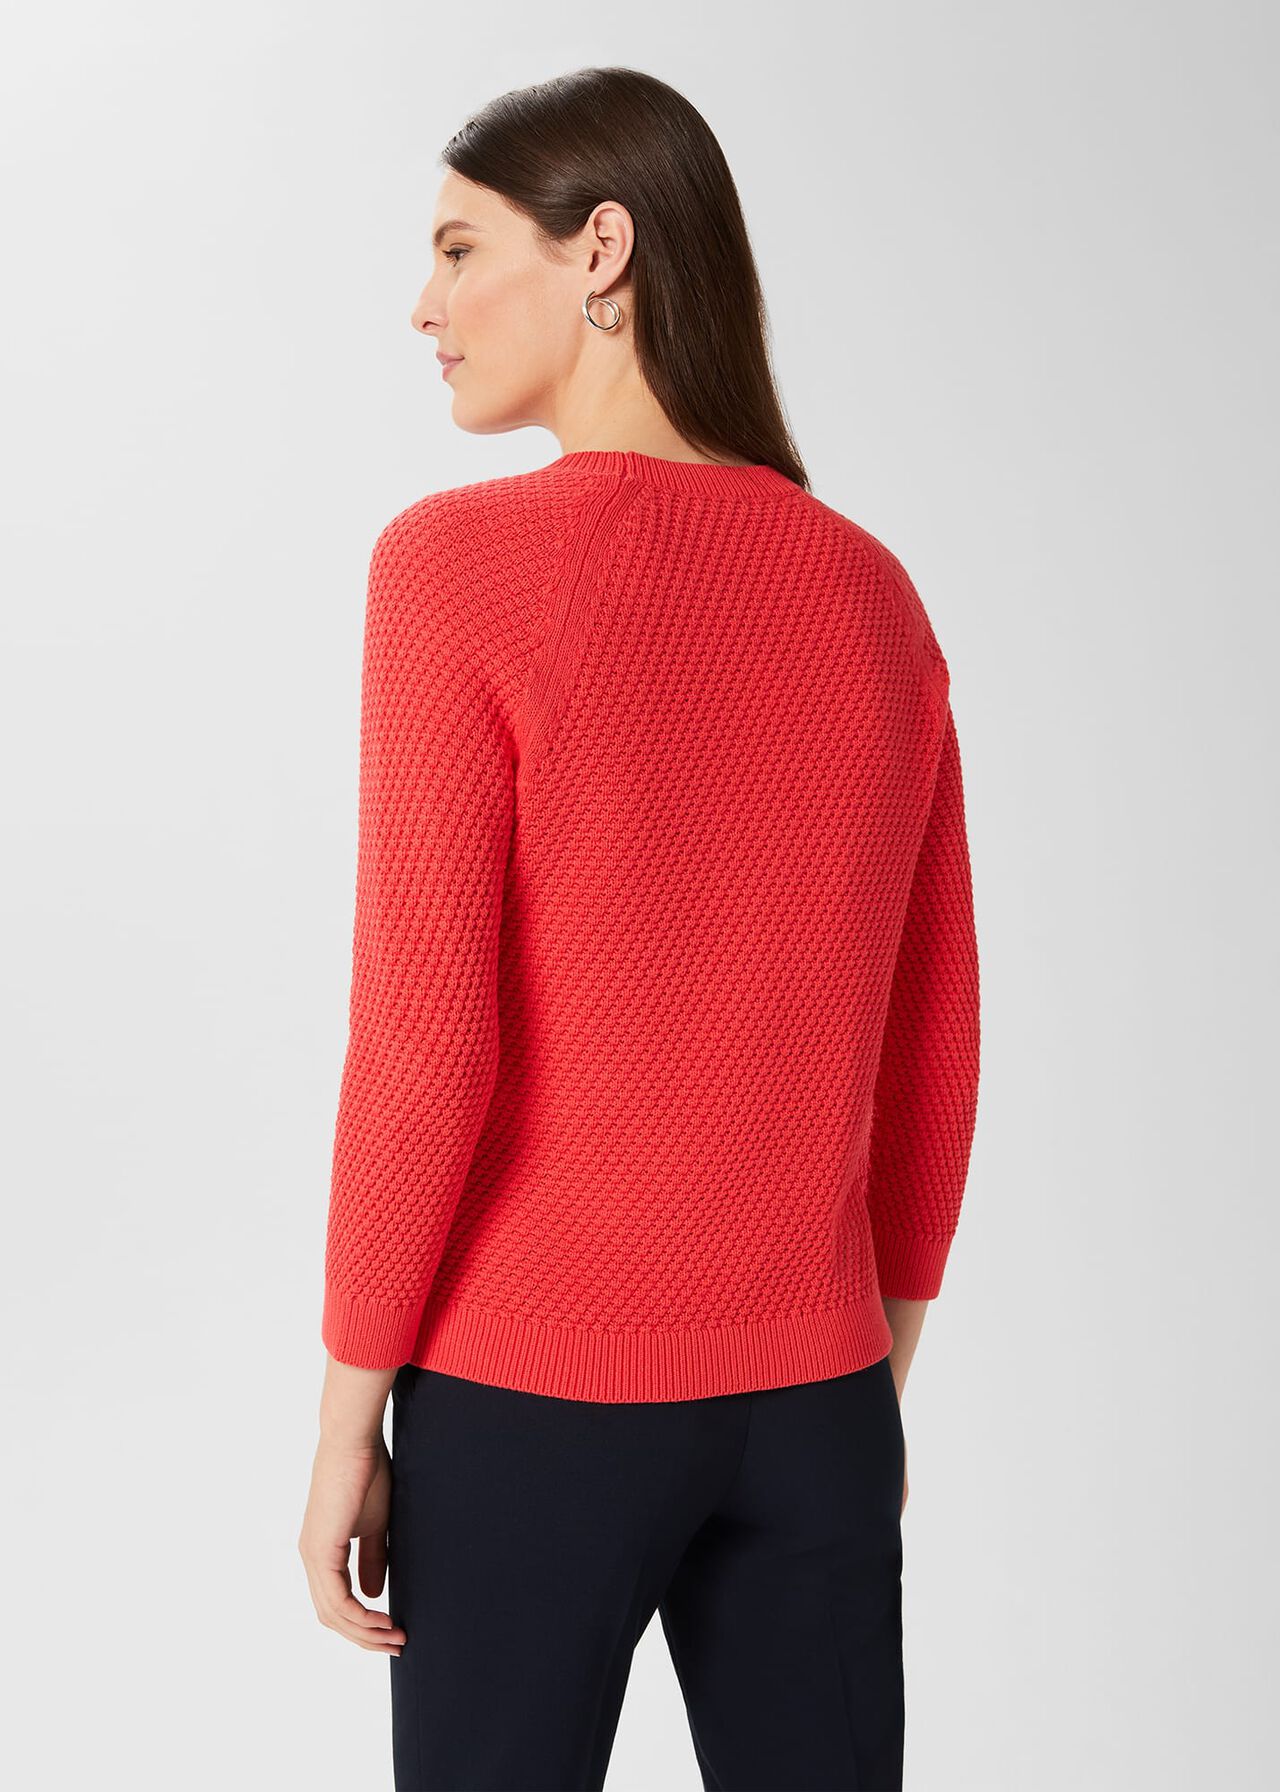 Lucie Cotton Sweater , Deep Coral, hi-res